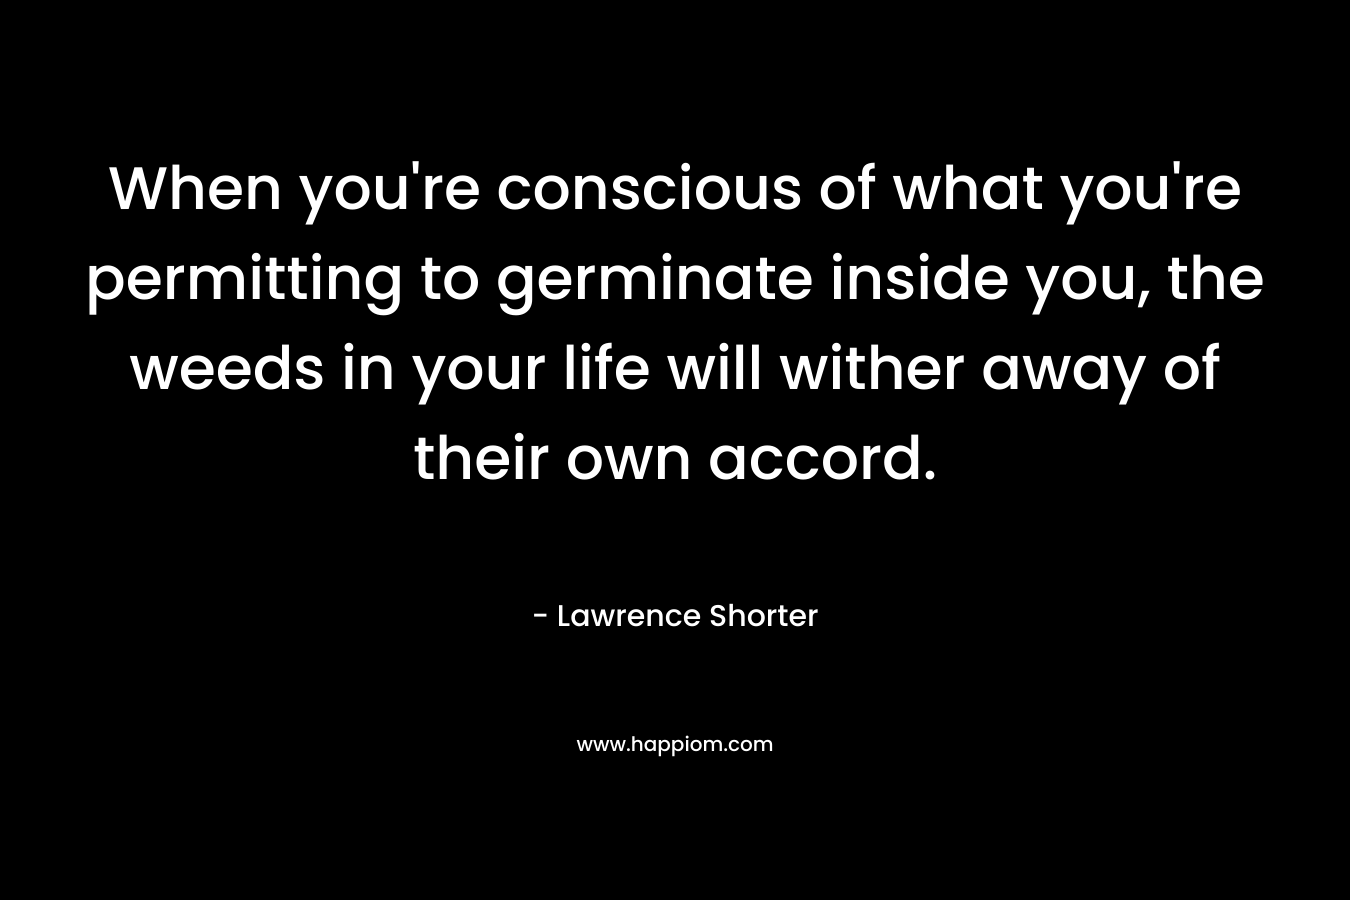 When you’re conscious of what you’re permitting to germinate inside you, the weeds in your life will wither away of their own accord. – Lawrence Shorter